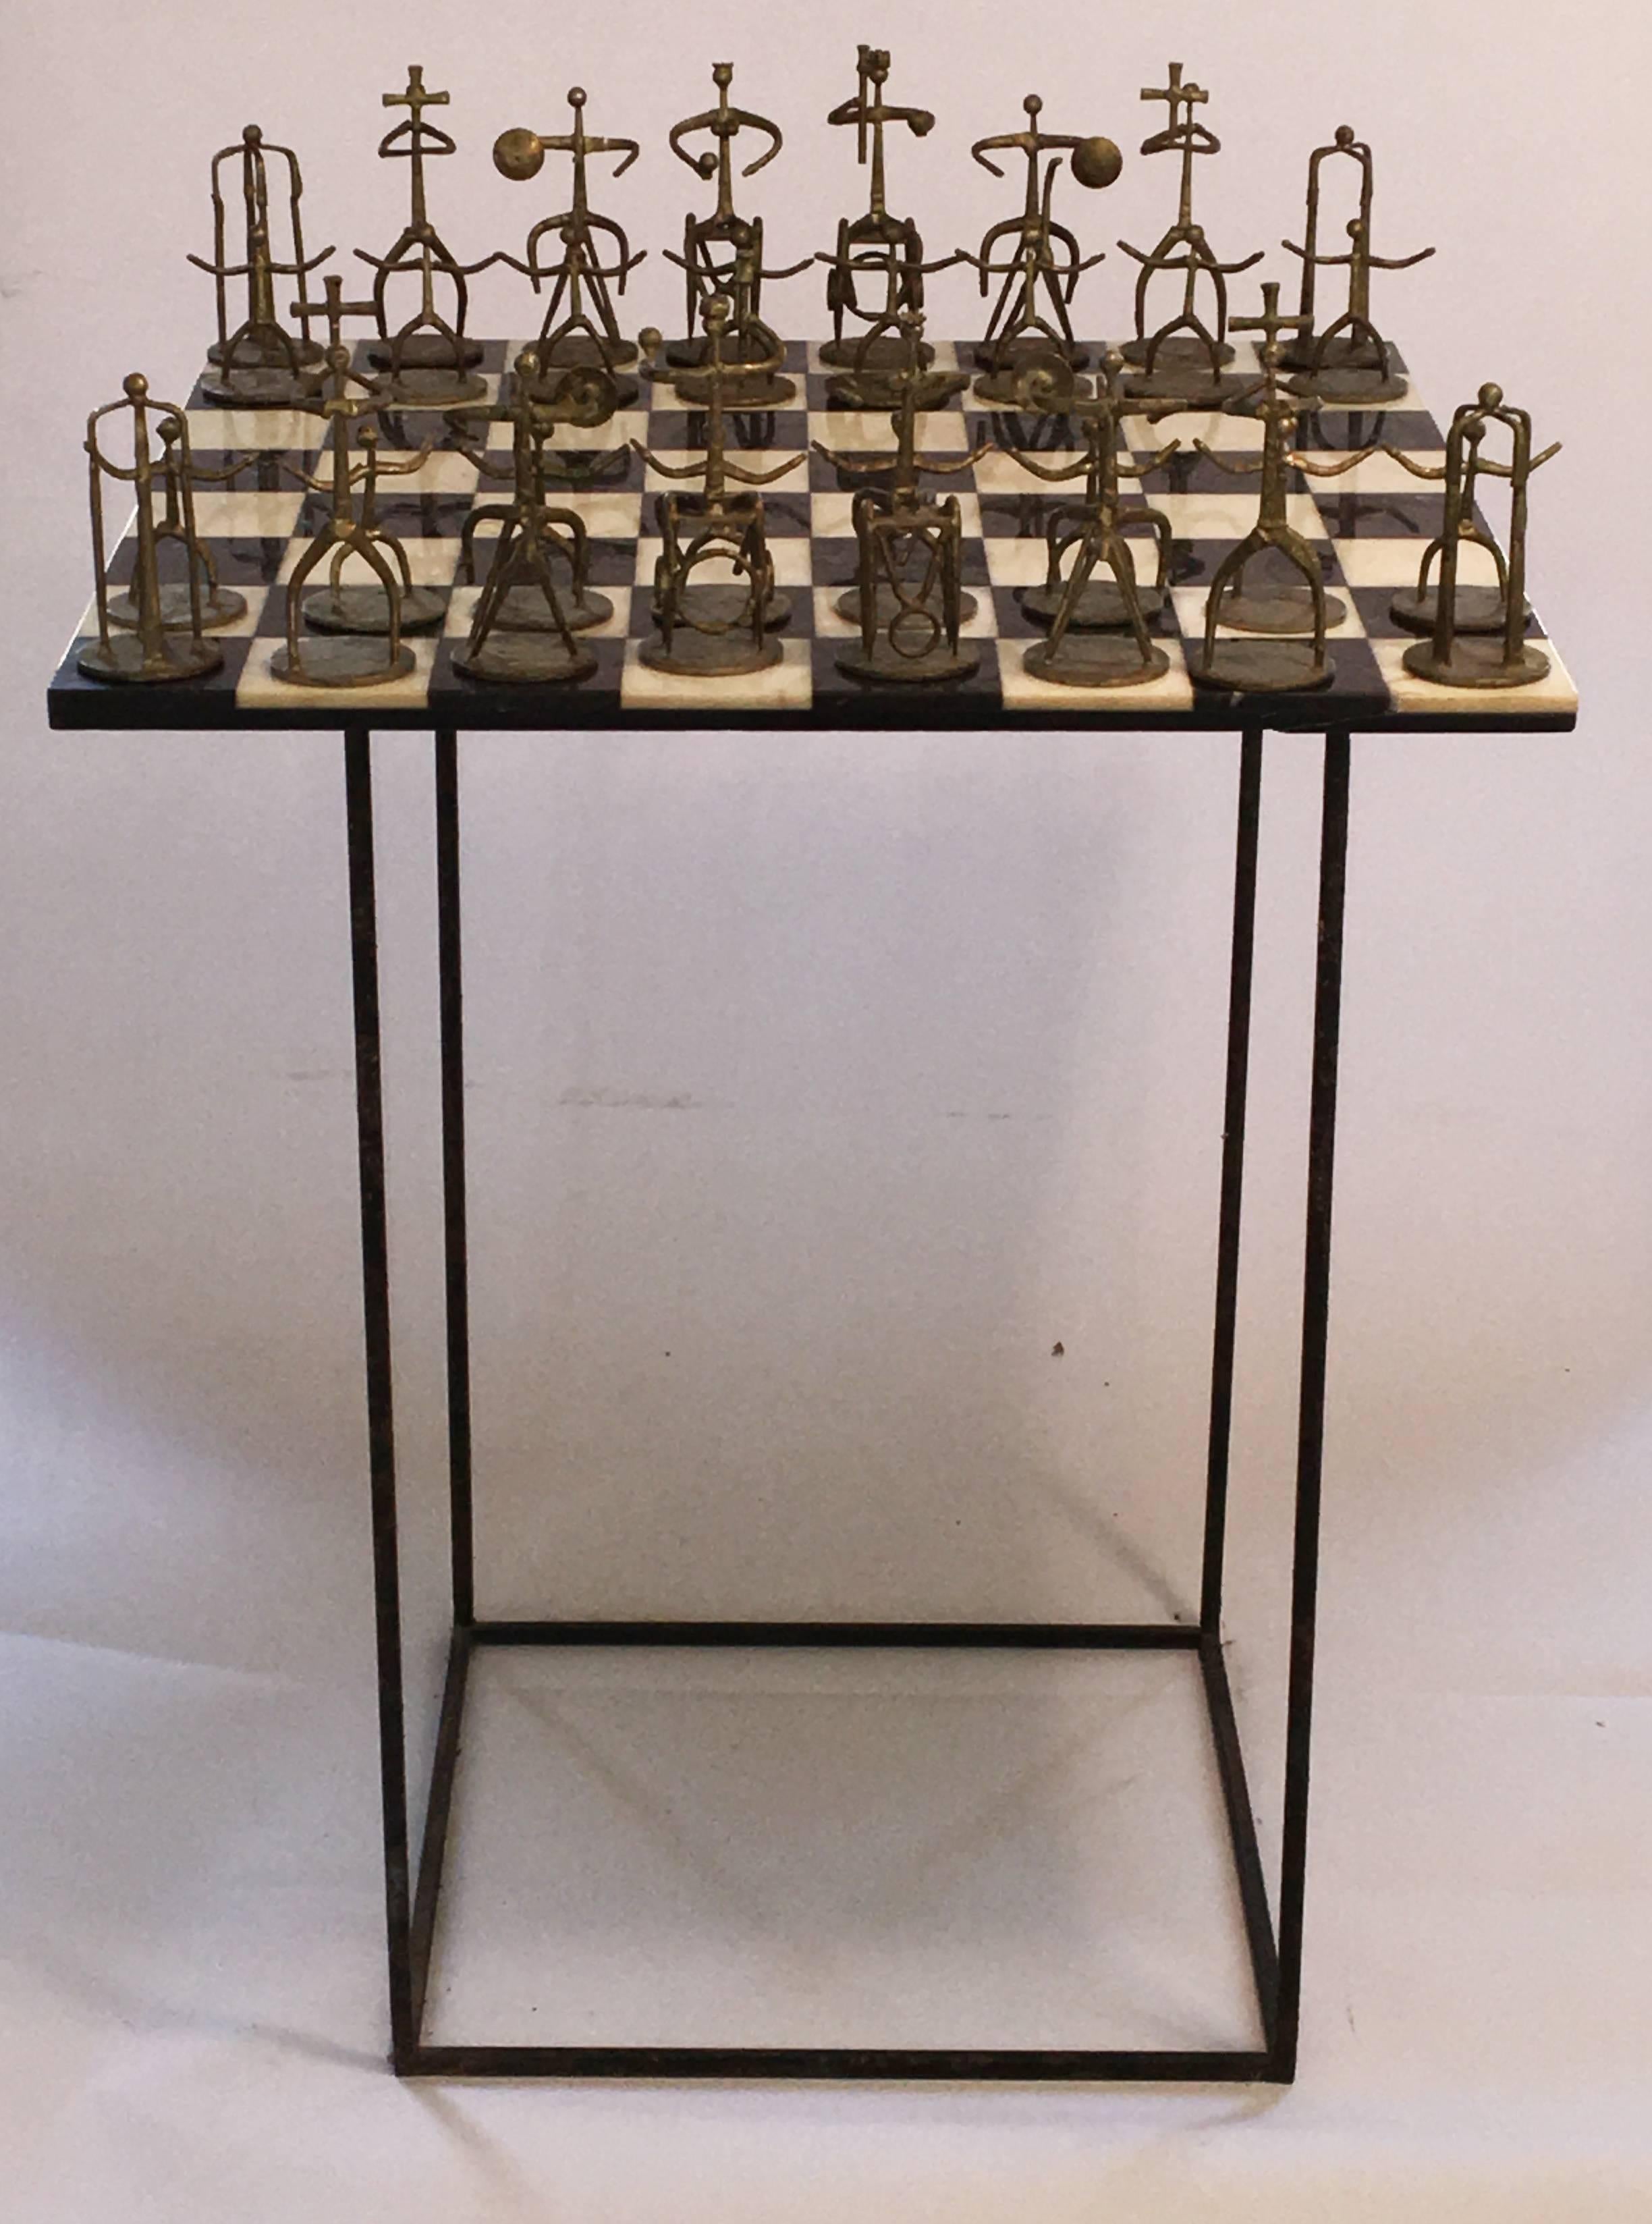 Beautiful chess set designed by Pittsburgh based sculptor Henry Burstynowicz. Chessboard constructed out of marble with amazing characters constructed out of steel and bronze. Acquired directly from a family member and this is one of only two that